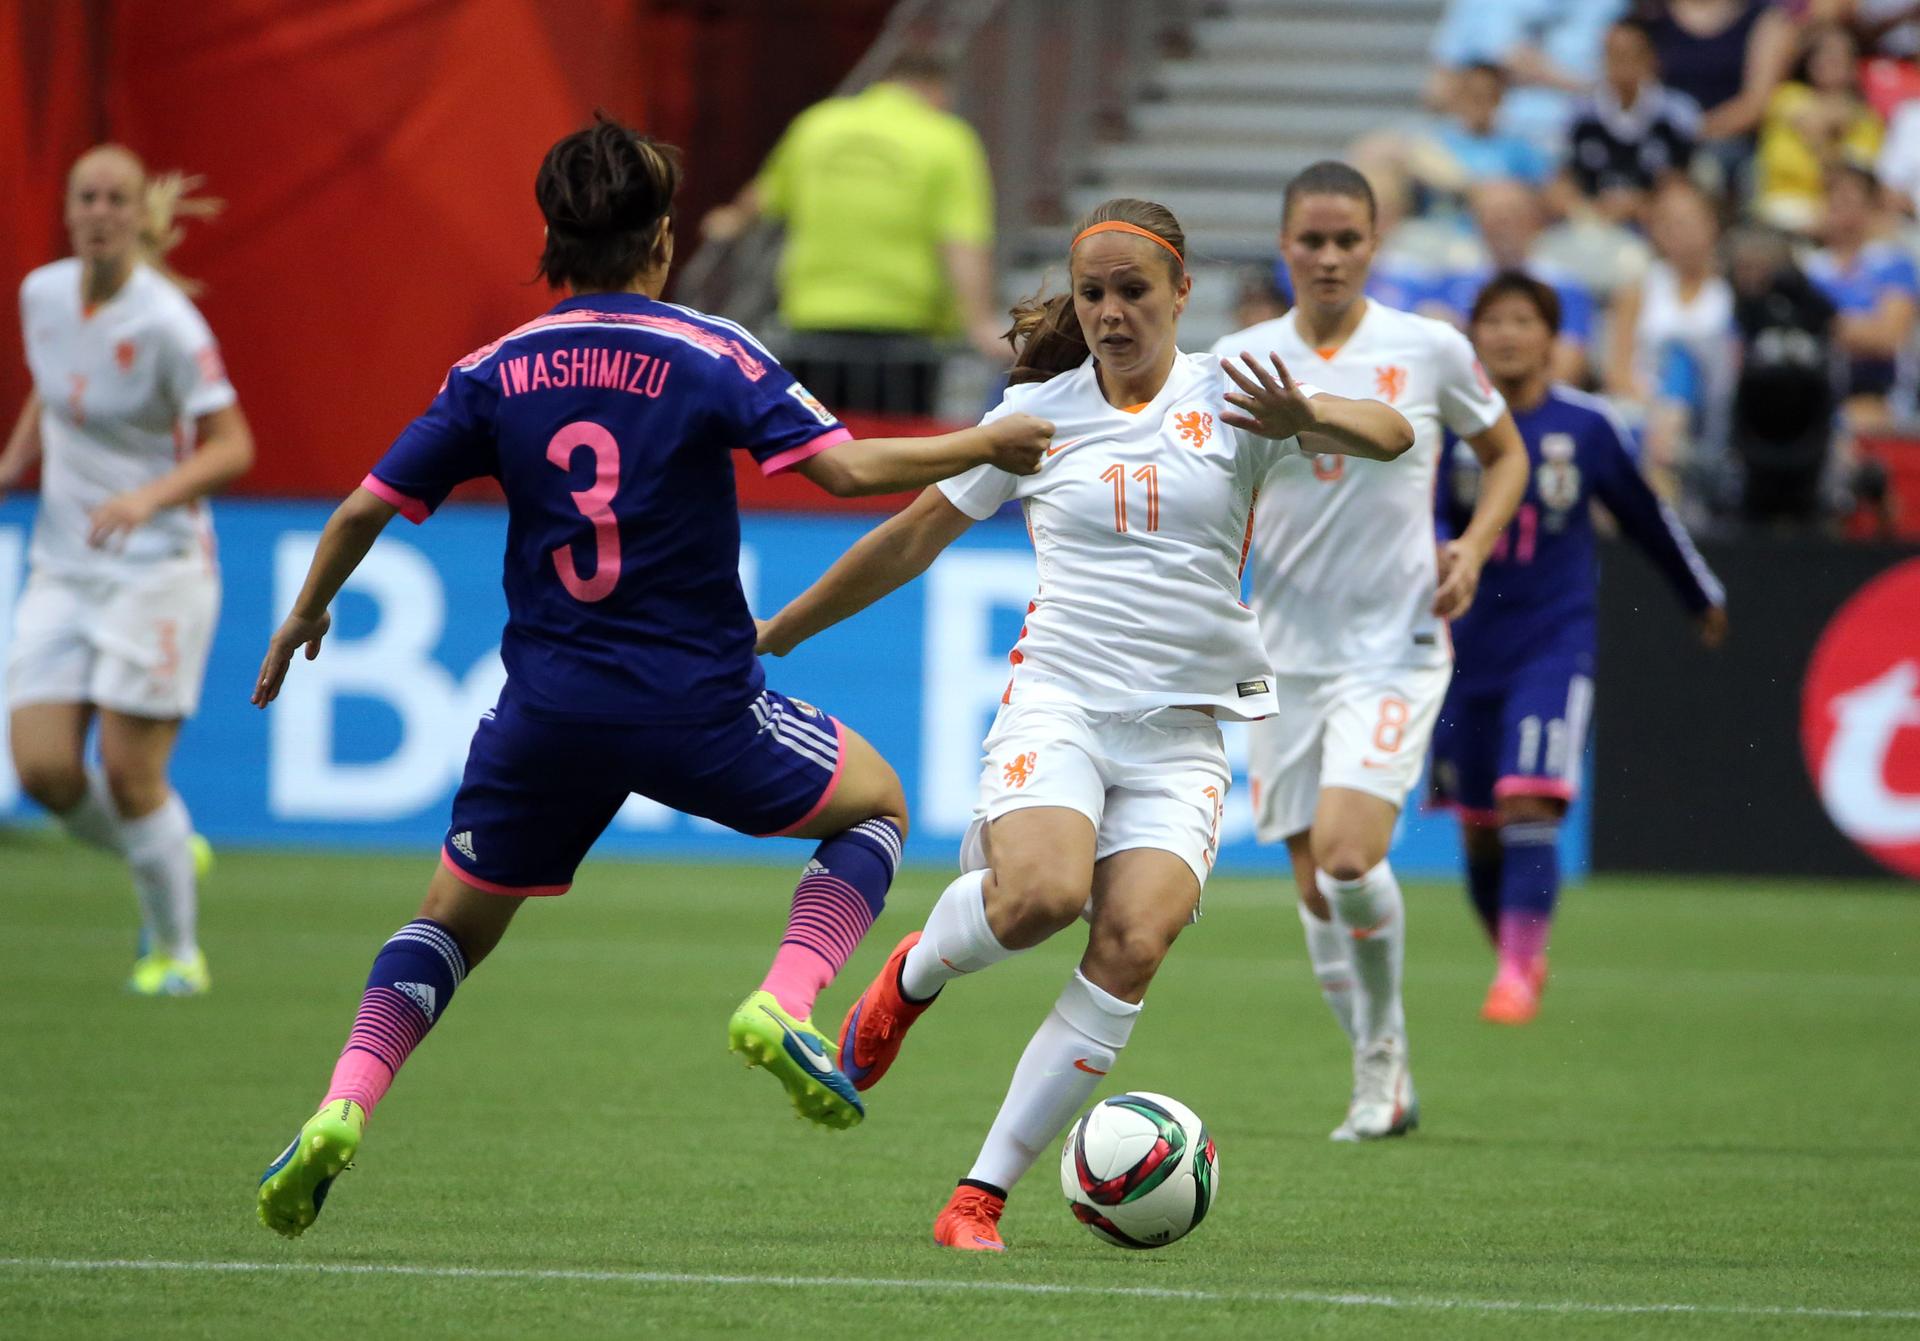 Netherlands forward Lieke Martens (11) controls the ball against Japan defender Azusa Iwashimizu (3) during the second half in the round of sixteen in the FIFA 2015 women's World Cup soccer tournament at BC Place Stadium.